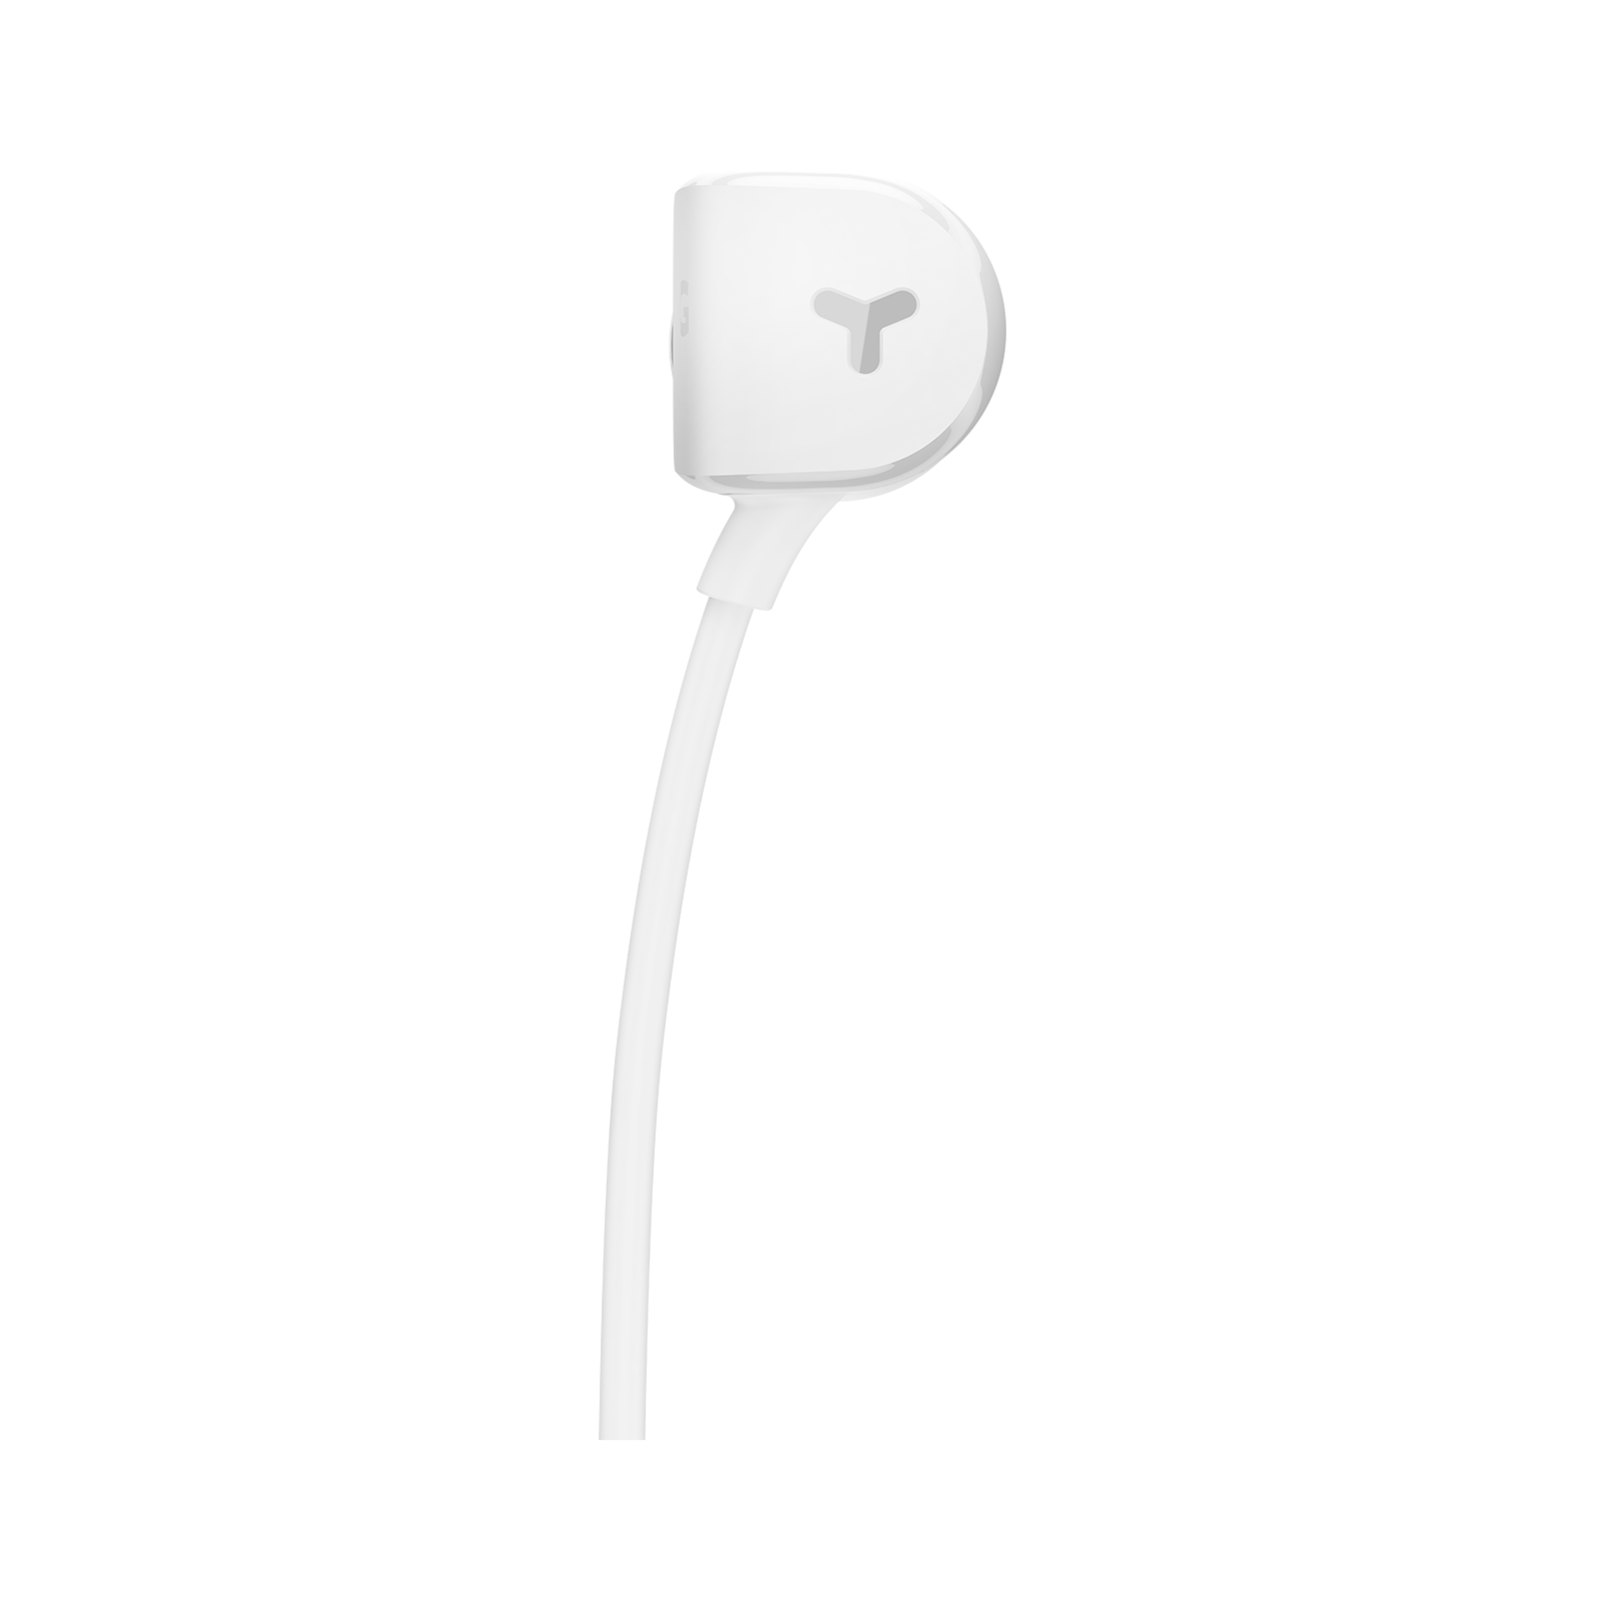 Y20 - White - An in-ear headphone shaped to fit any ear - Back